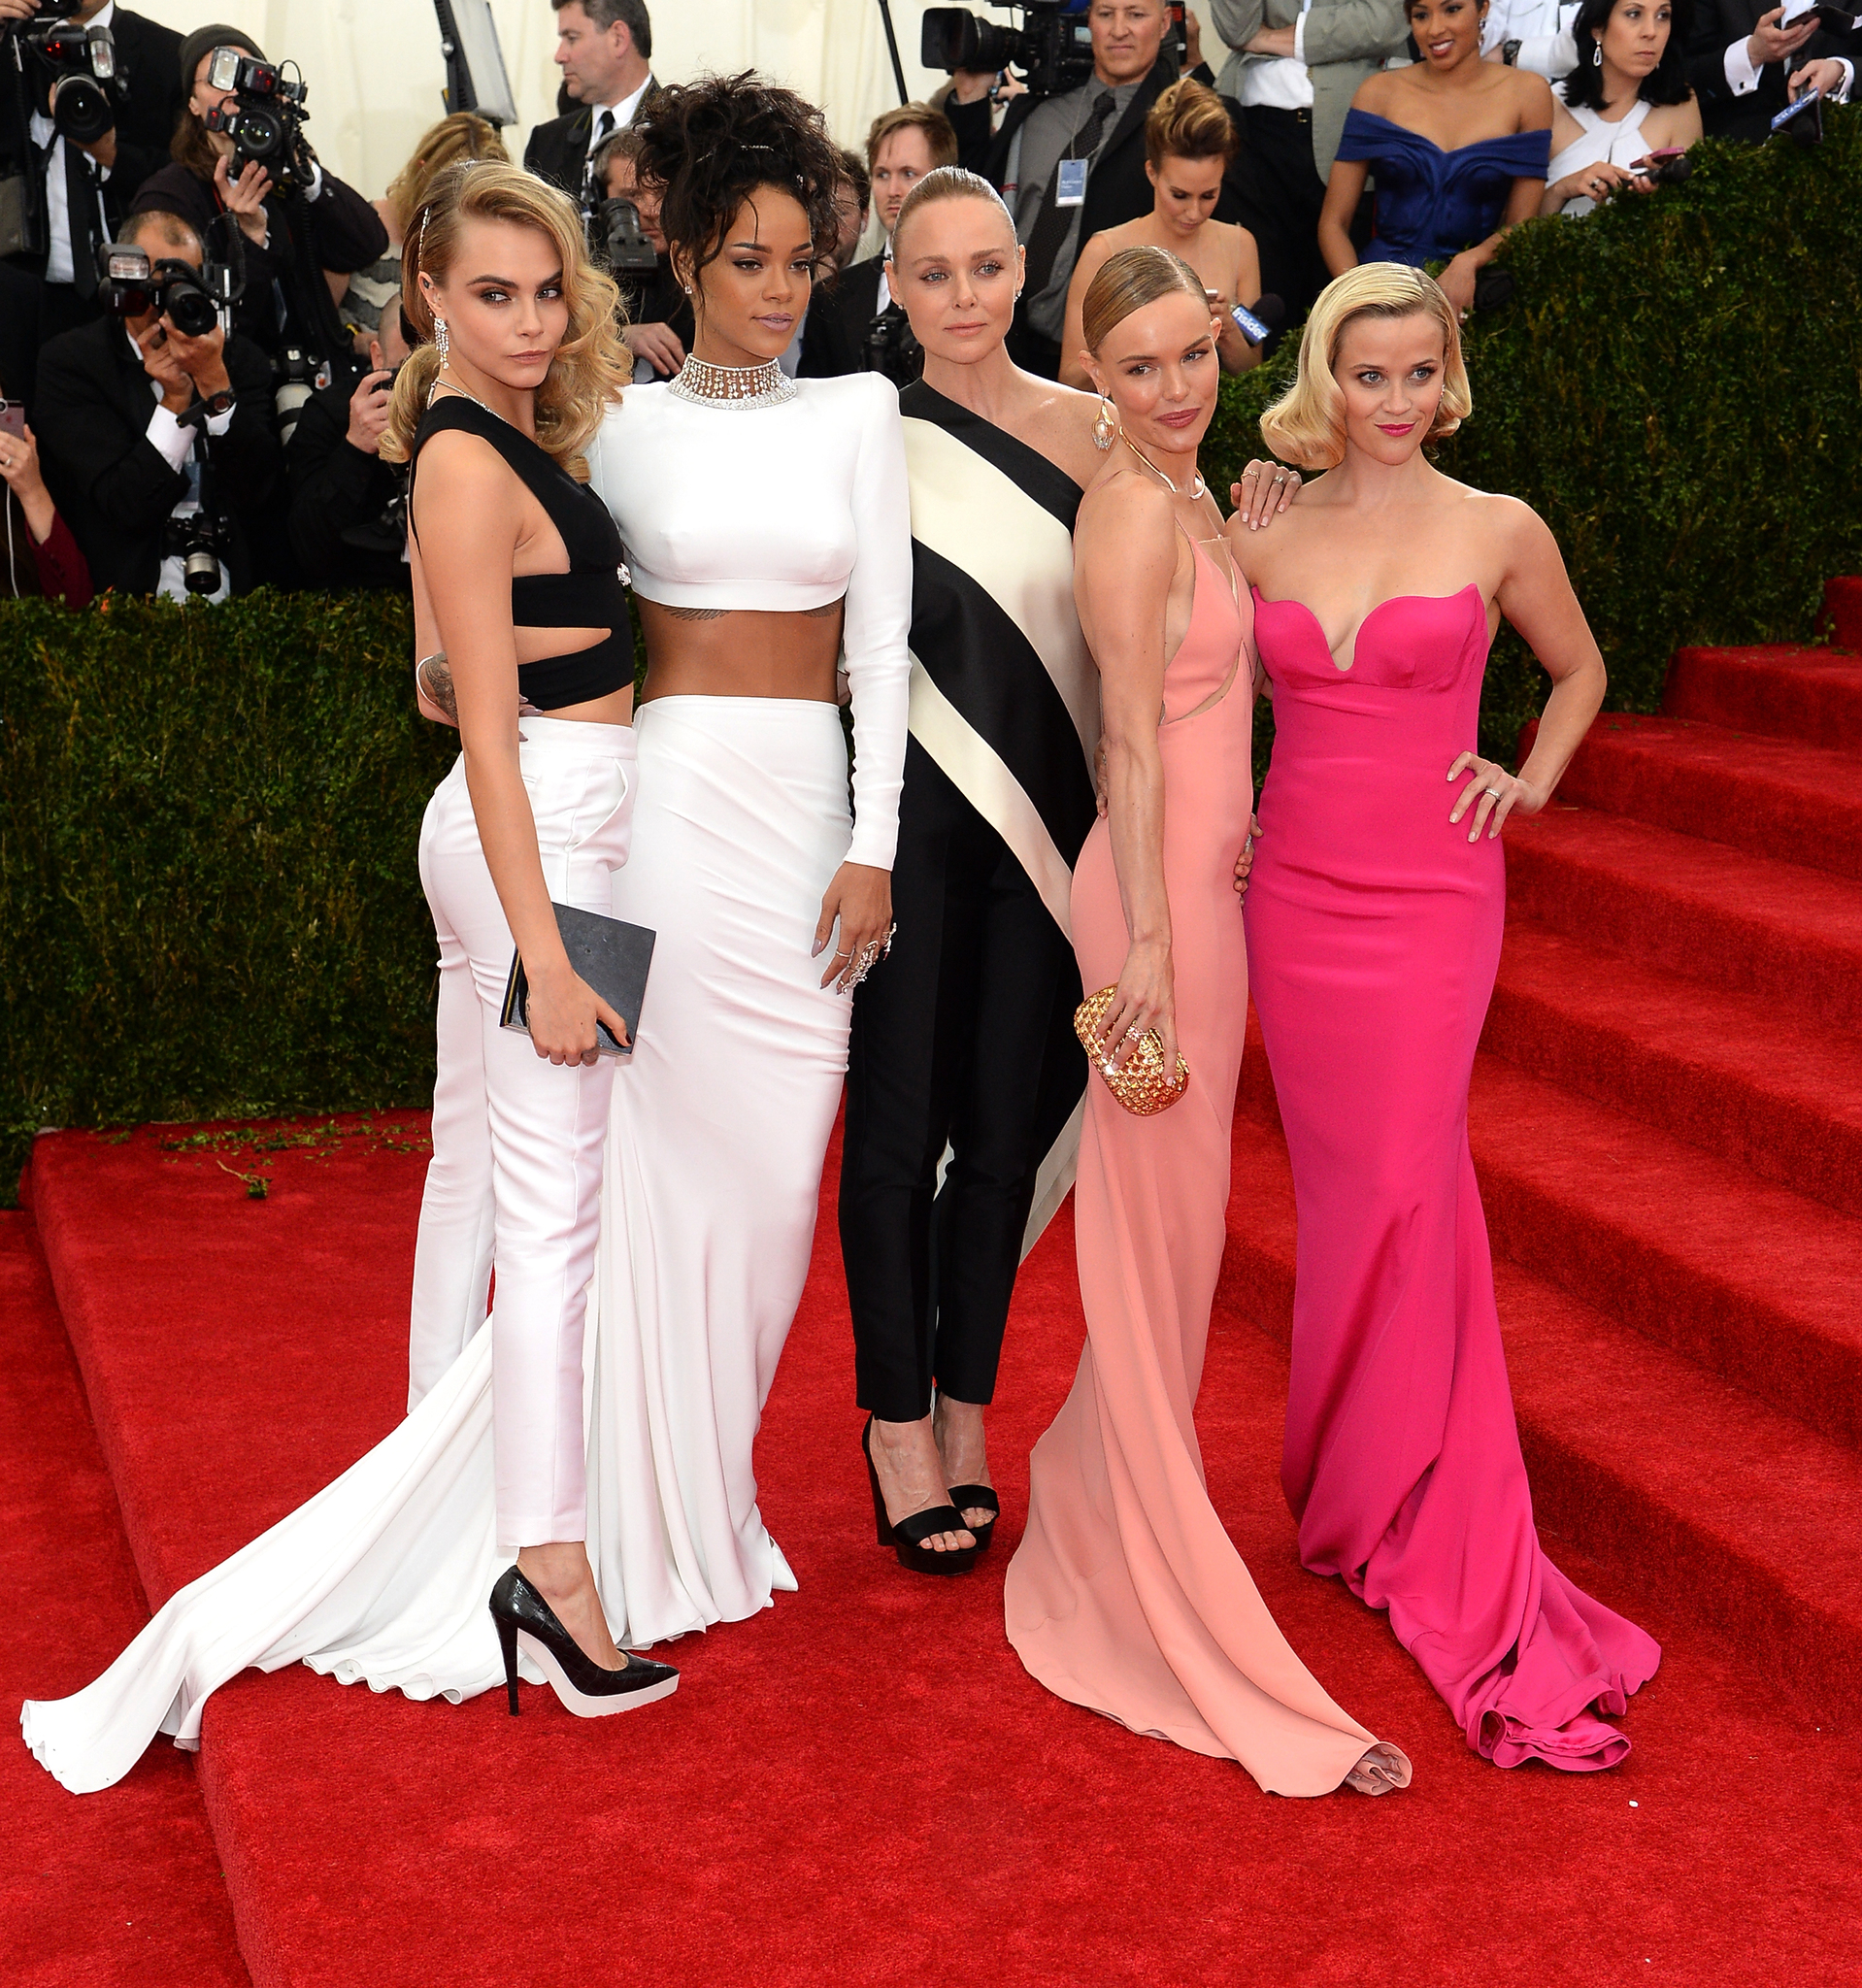 Reese Witherspoon, Kate Bosworth, Stella McCartney, Rihanna and Cara Delevingne